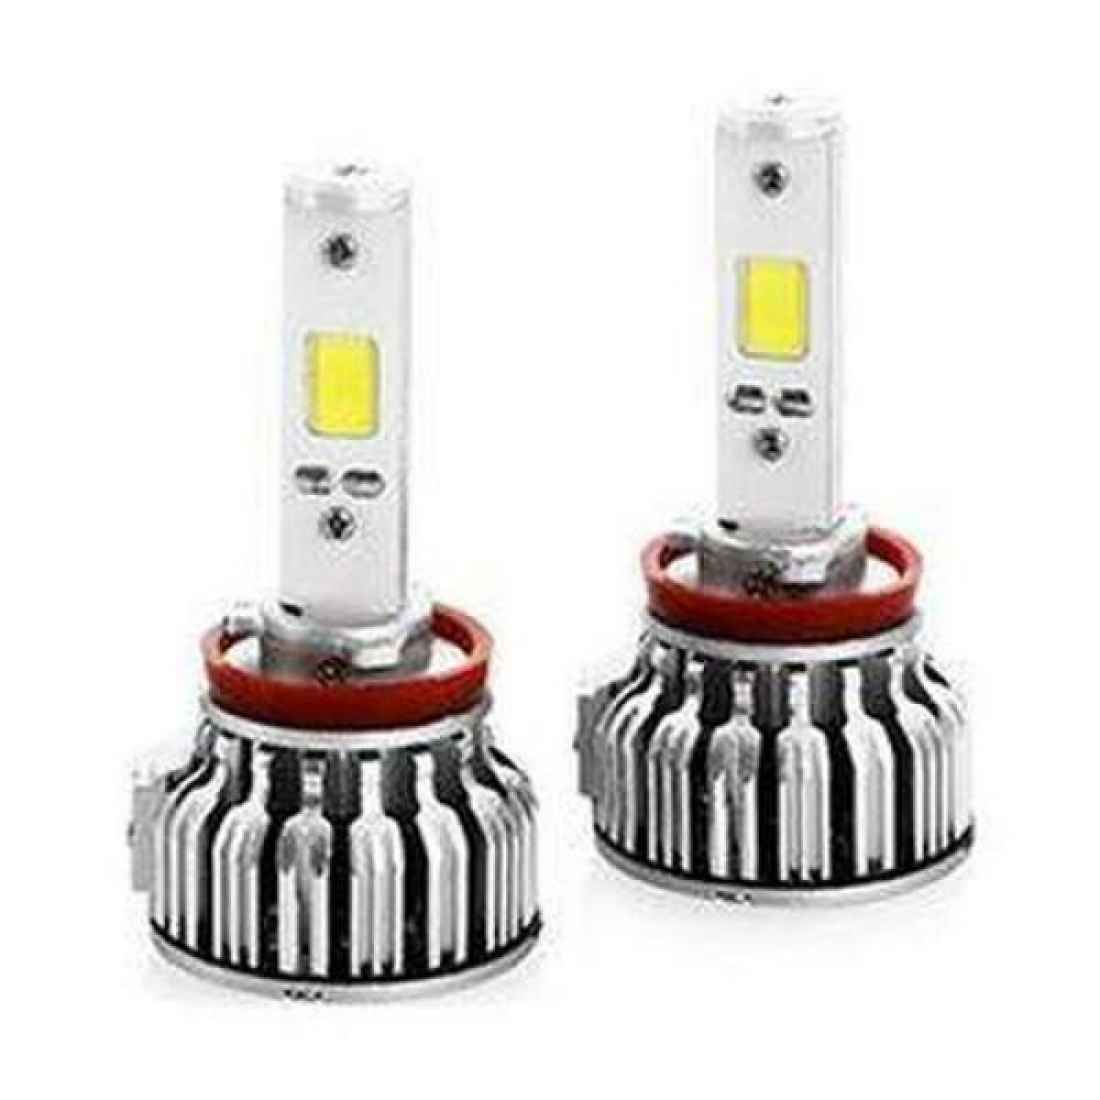 Clearlight led Standard h4 4300 LM. Led лампы Clearlight. Clled43h11. Комплект ламп led Clearlight h4 2800 LM ( 2 шт). Купить лед h1